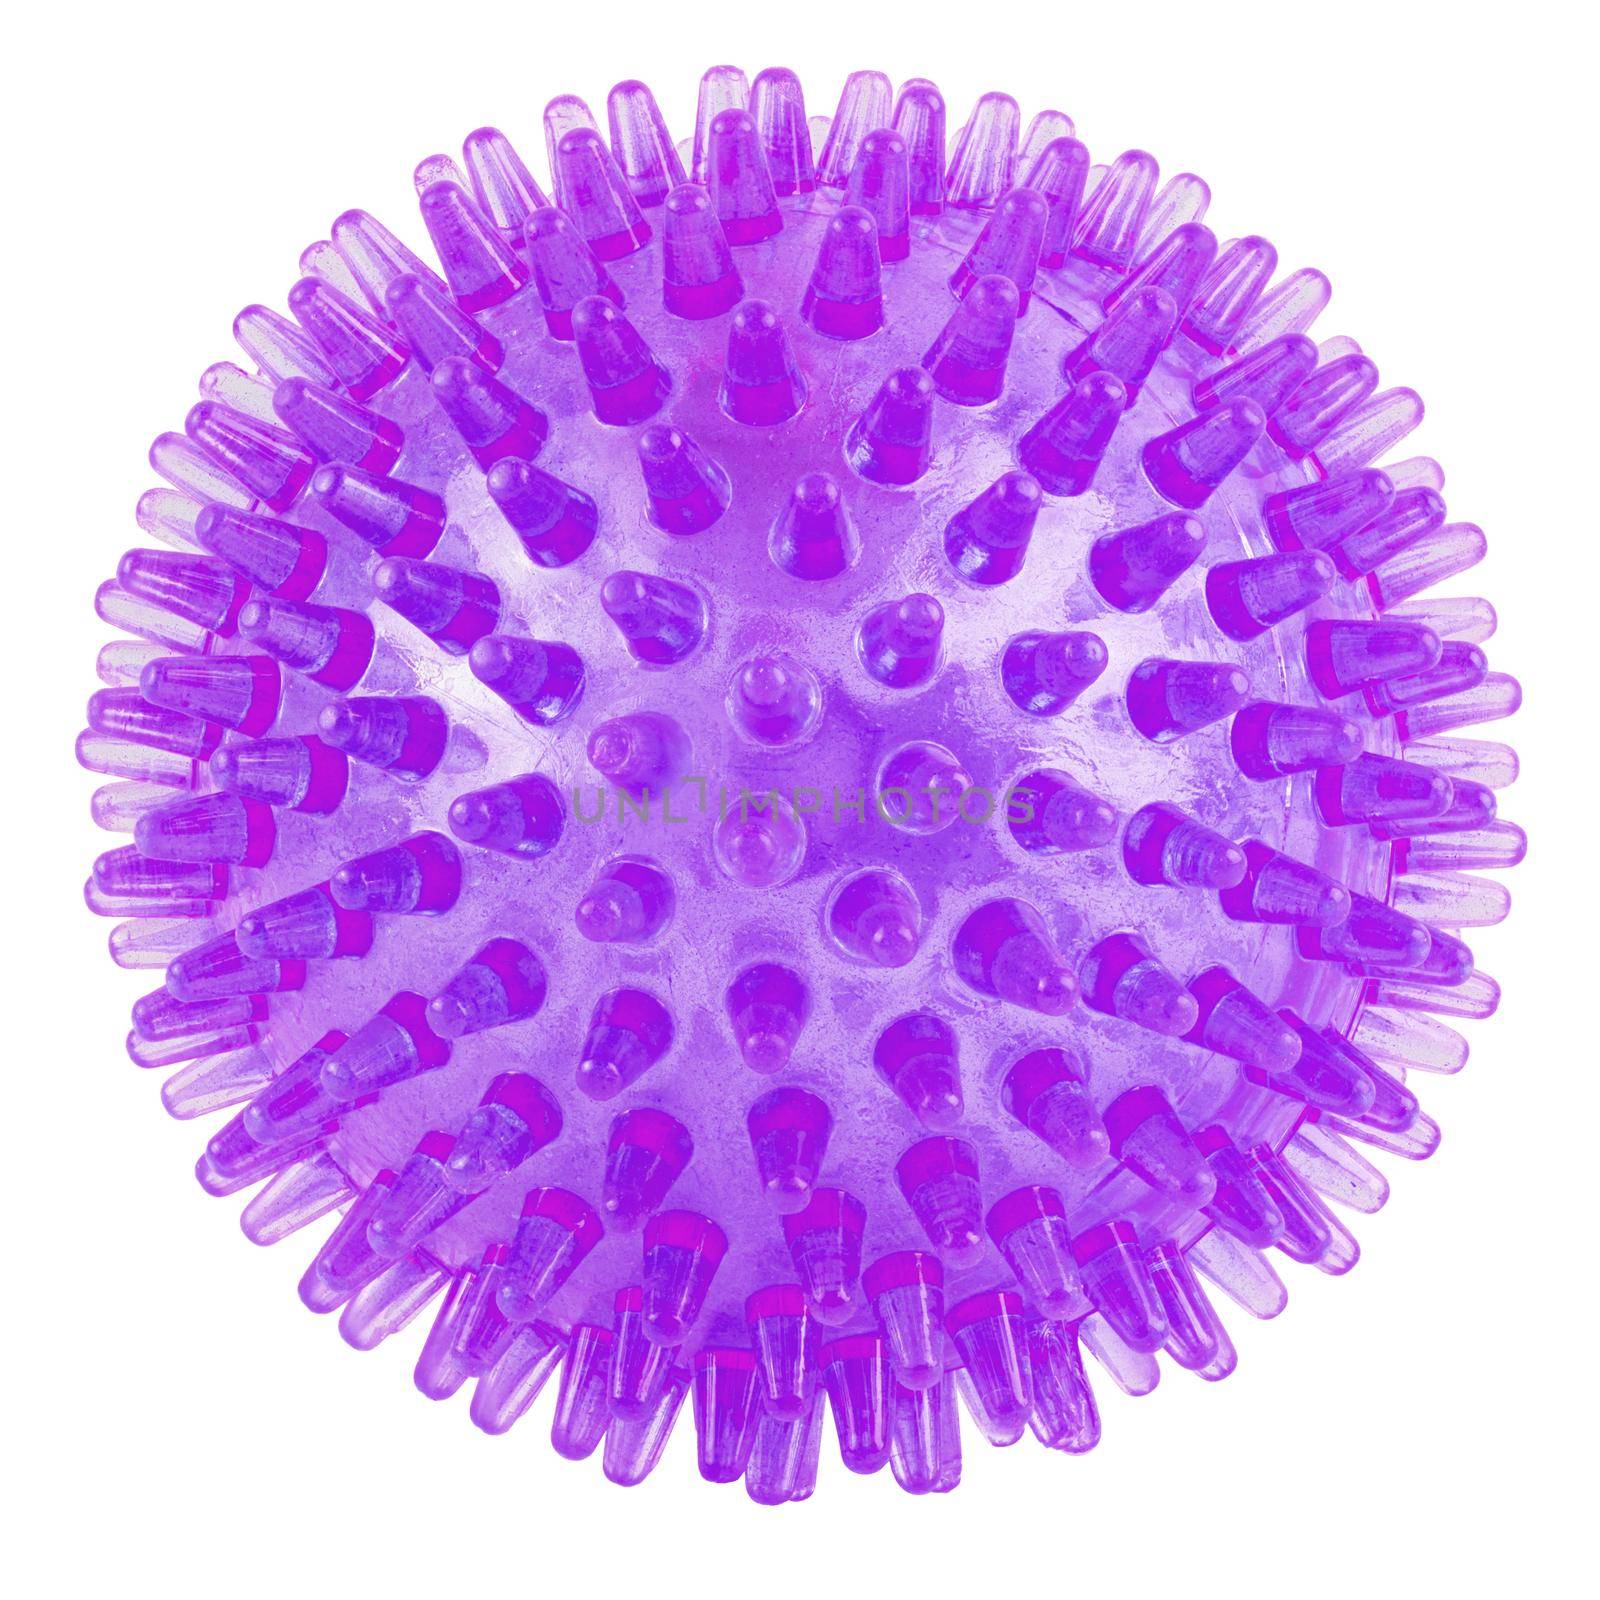 transparent purple spiked plastic ball isolated on white background - massager, dog toy and COVID-19 symbol by z1b